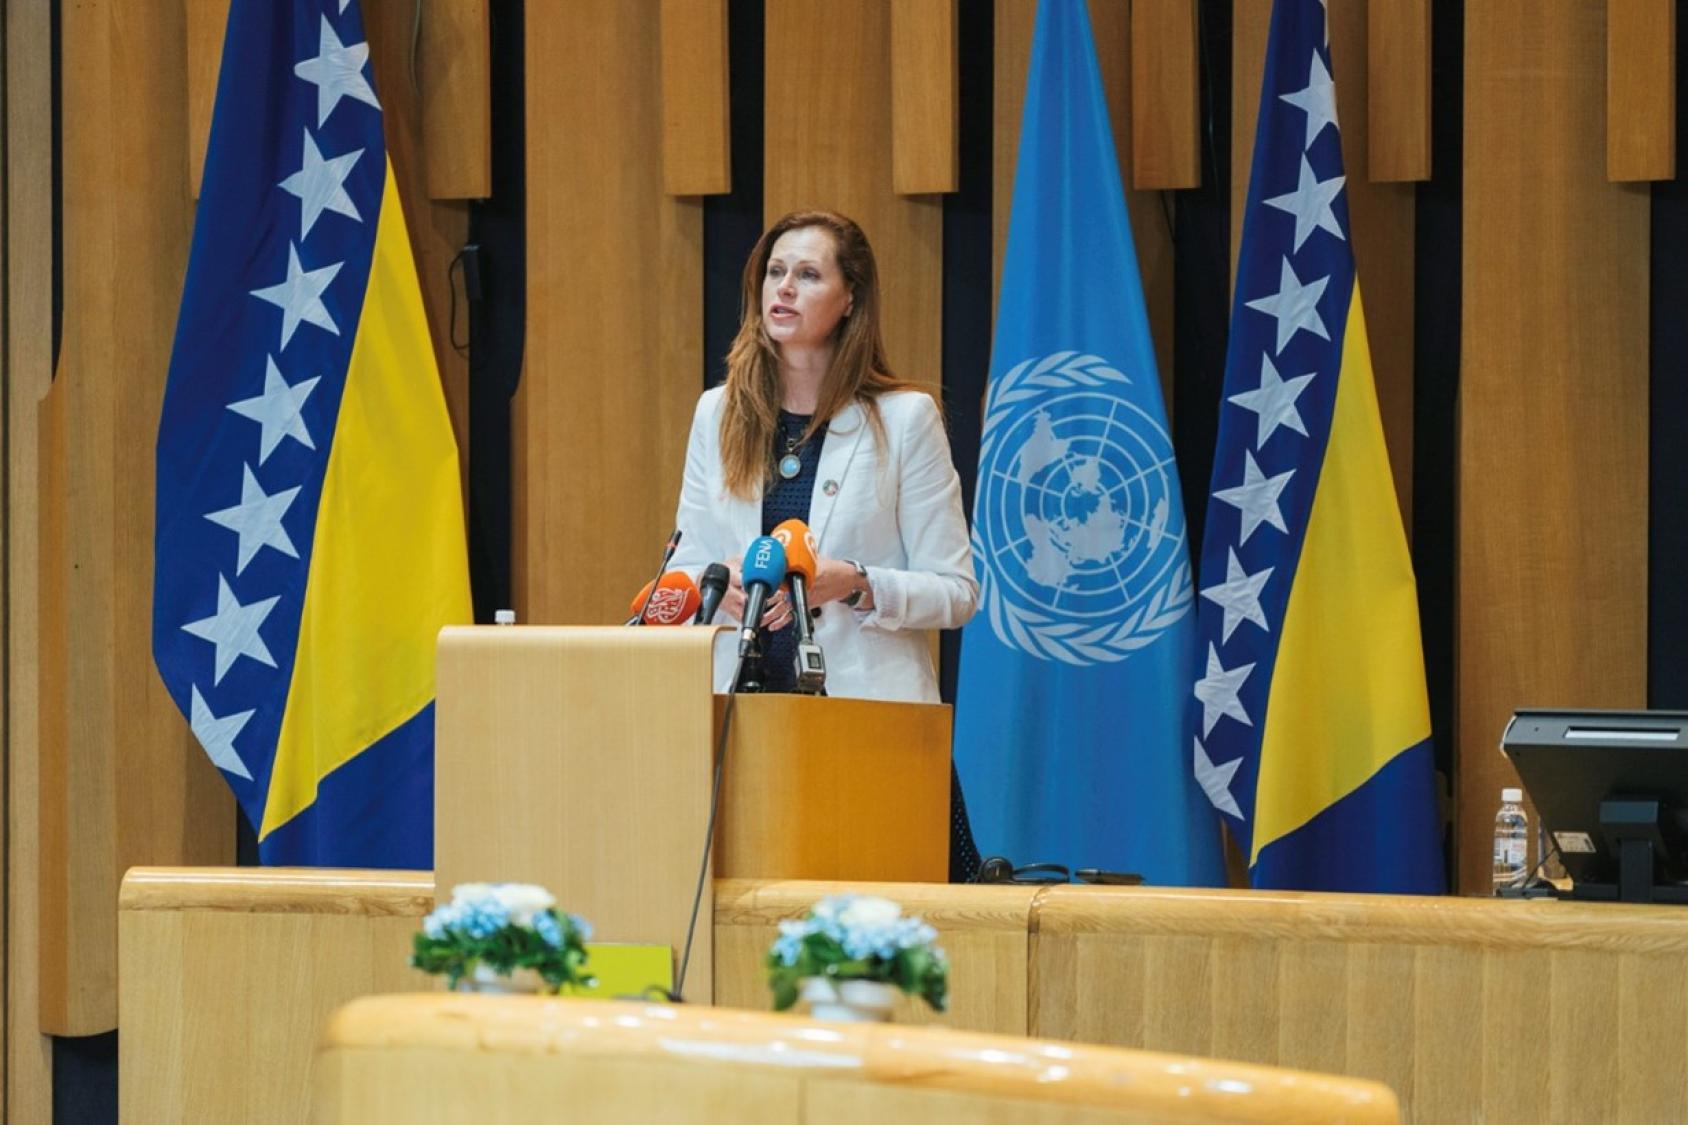 UN Resident Coordinator in Bosnia and Herzegovina, Ingrid Macdonald stands at the podium at the Parliamentary Assembly to give a speech on BiH’s contribution to the UN over the last 30 years. 